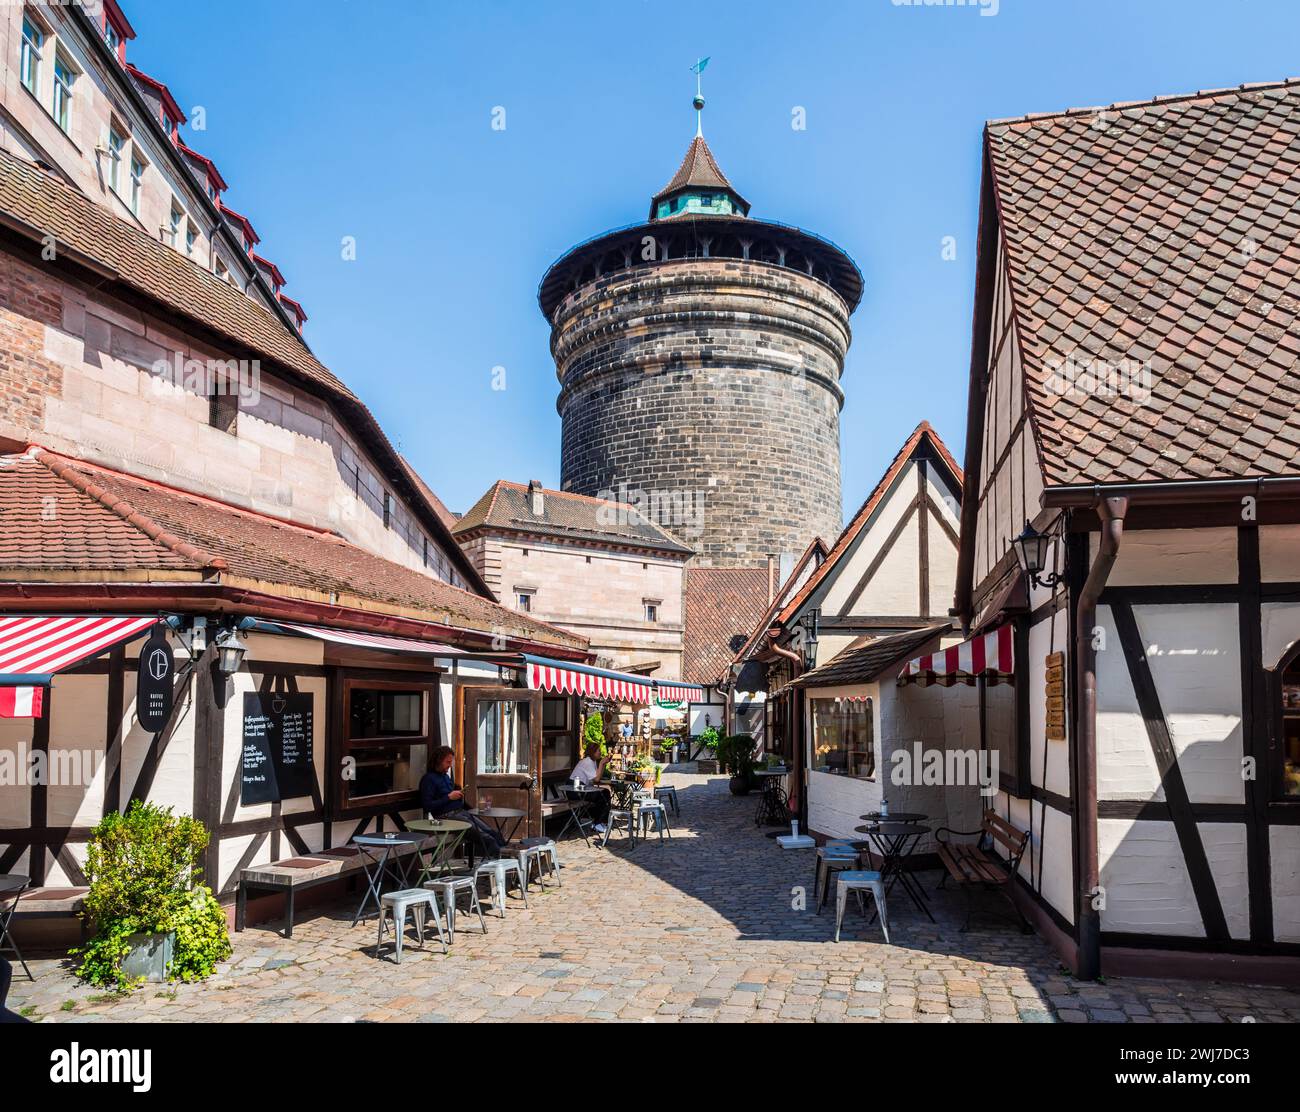 The Handwerkerhof in Nuremberg, Germany, is a craftmen's yard in the old town at the foot of the Frauentorturm tower with craft shops and restaurants. Stock Photo